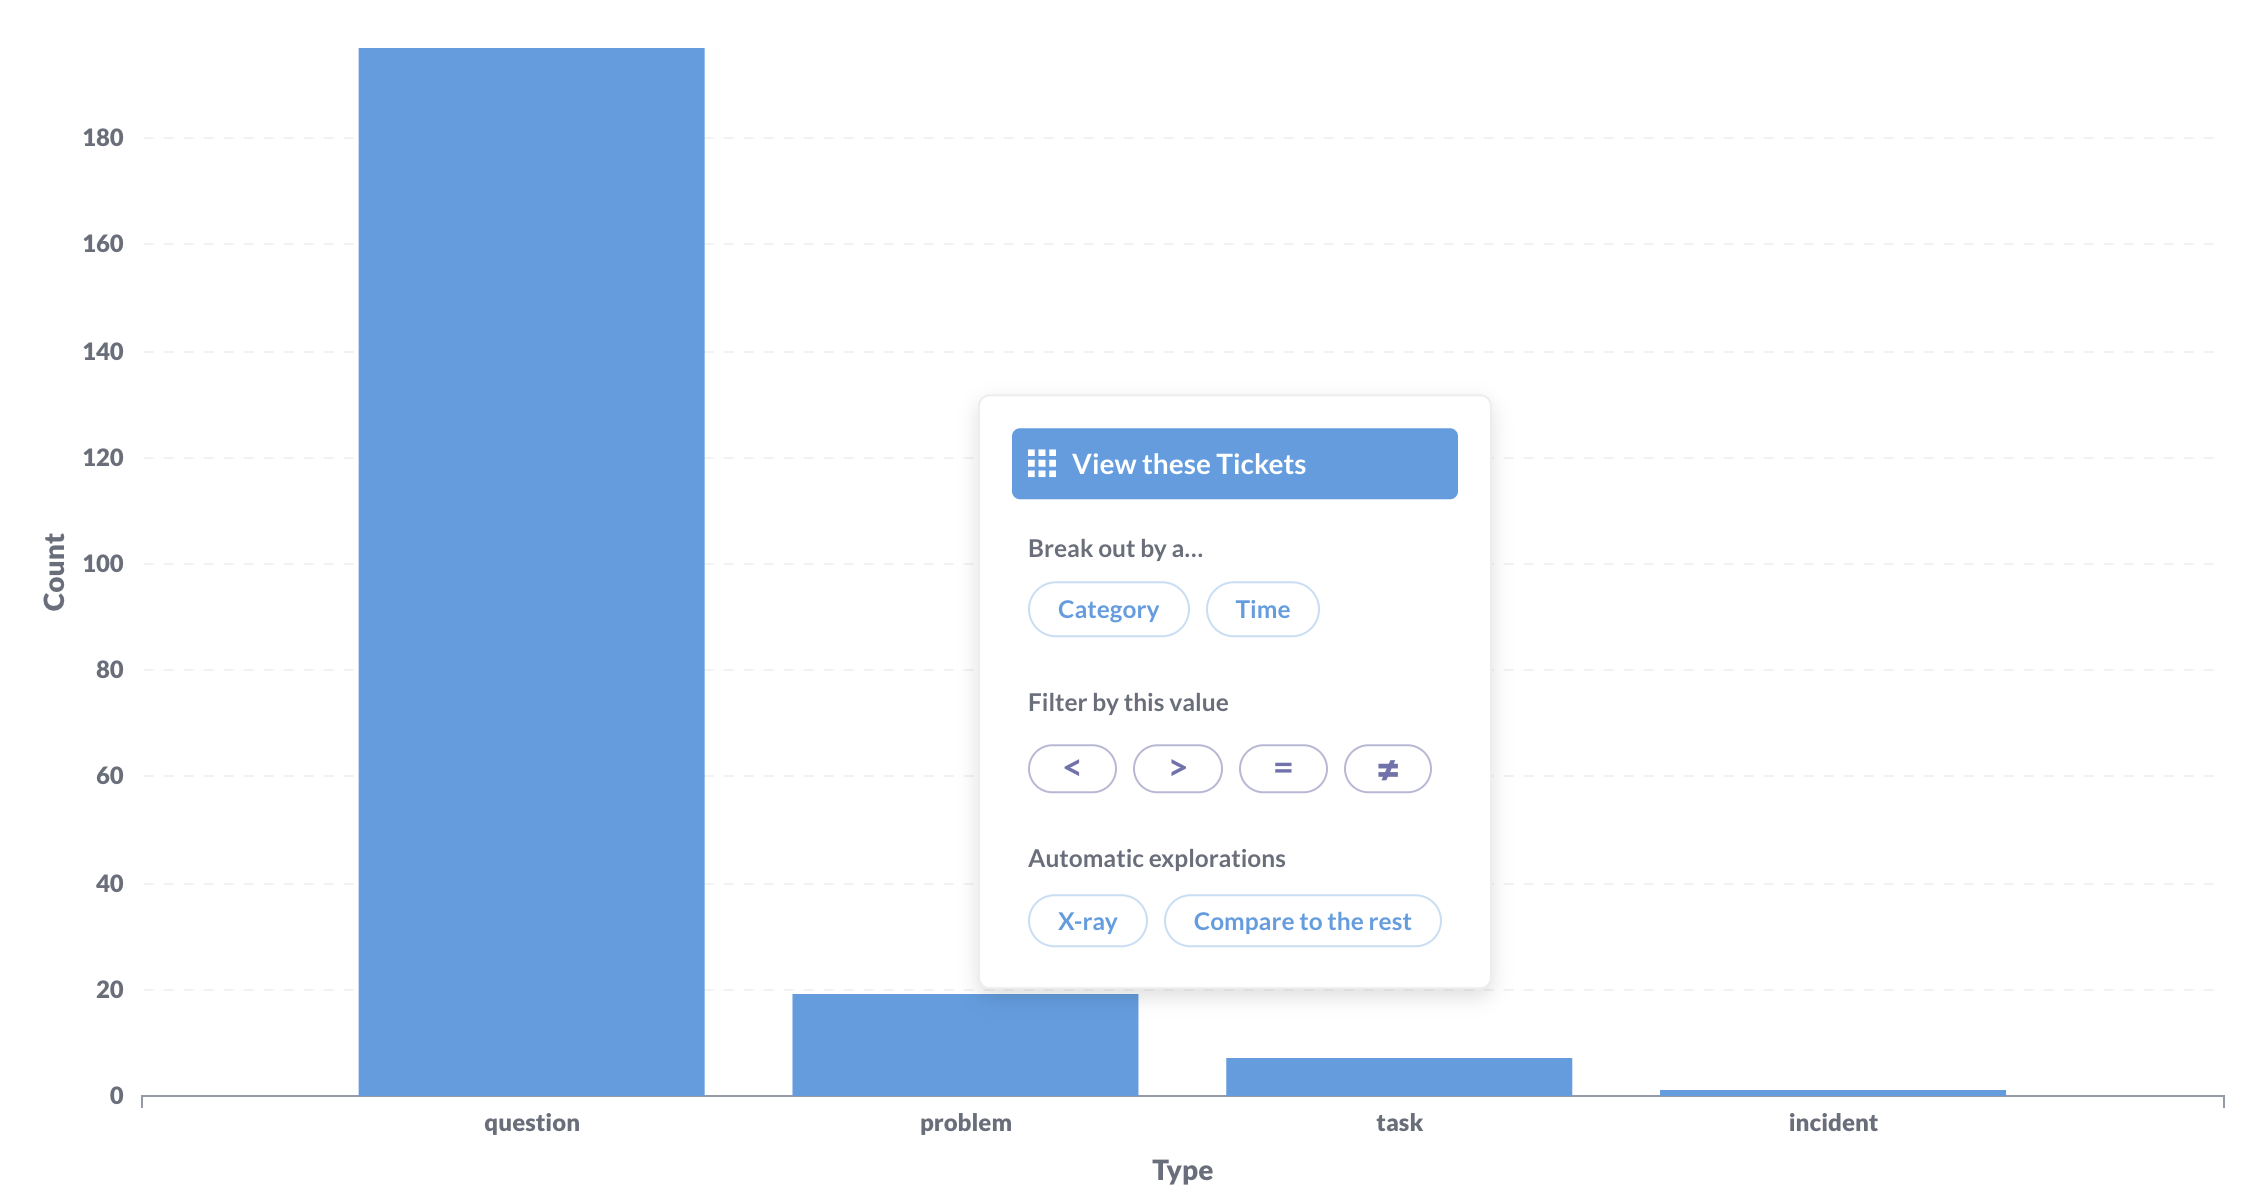 View tickets by type